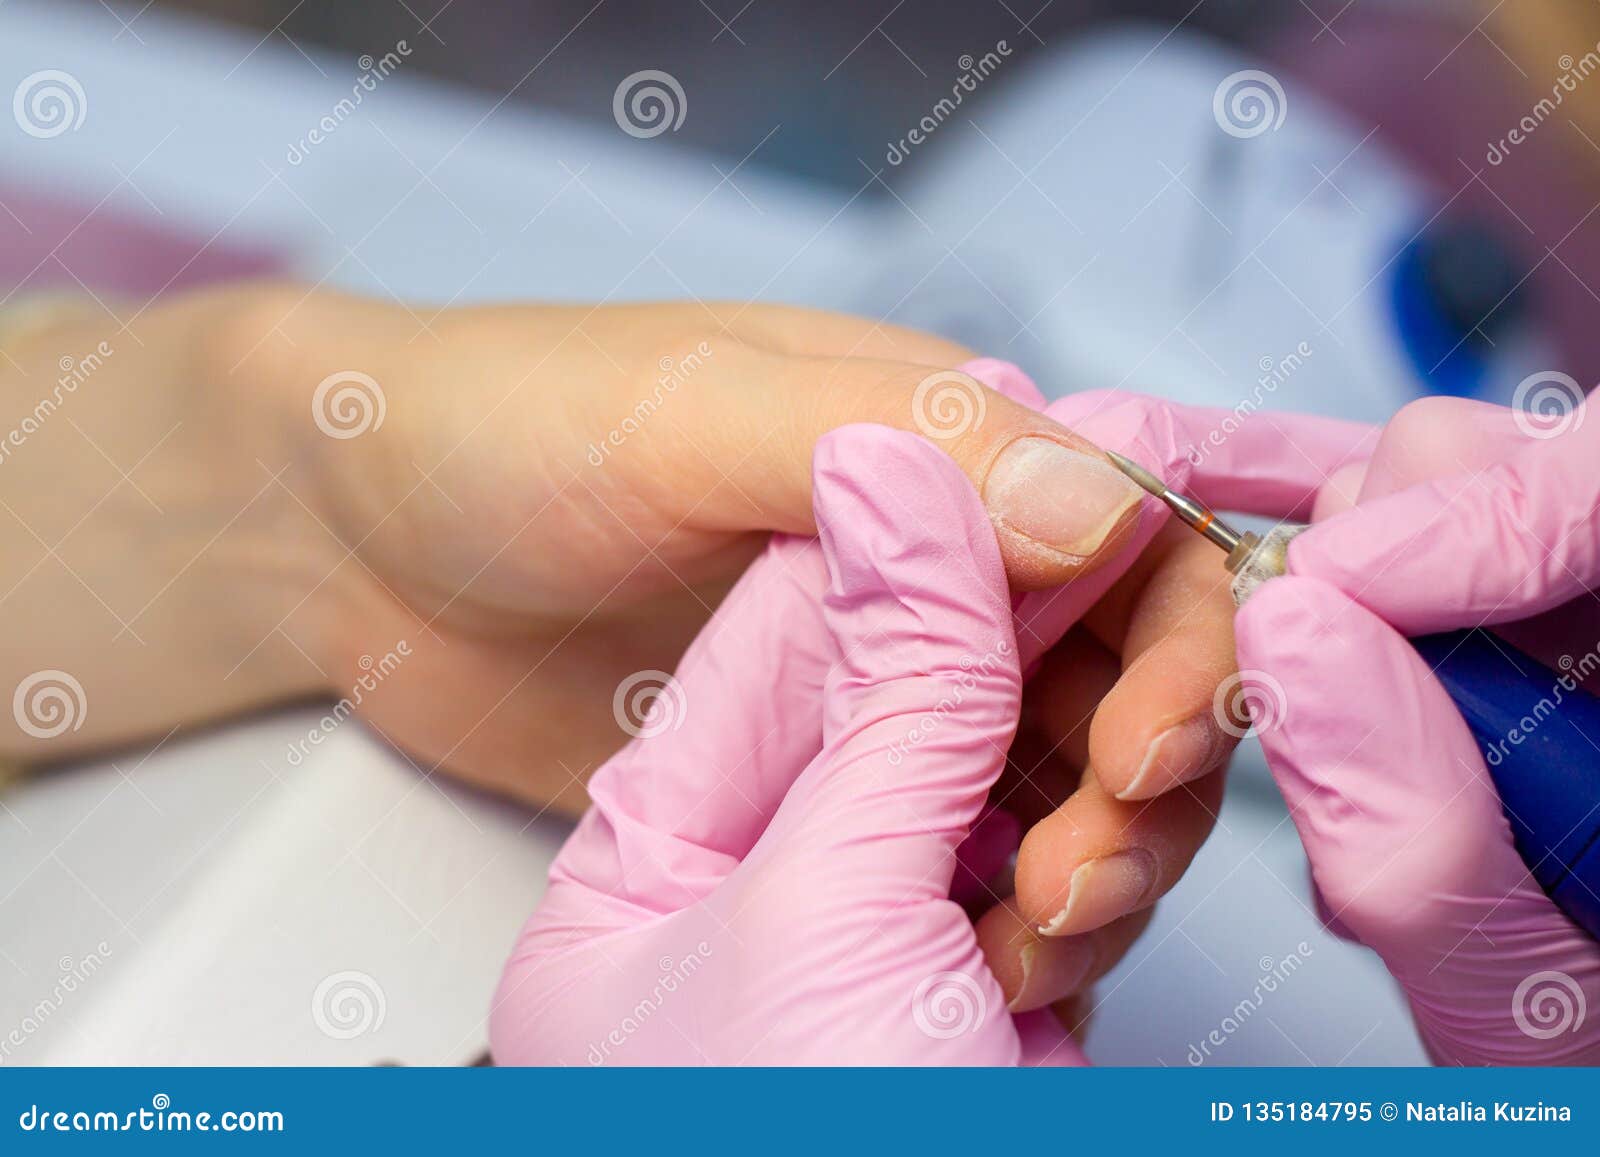 hardware manicure using electric device machine. procedure for the preparation of nails before applying nail polish. hands of